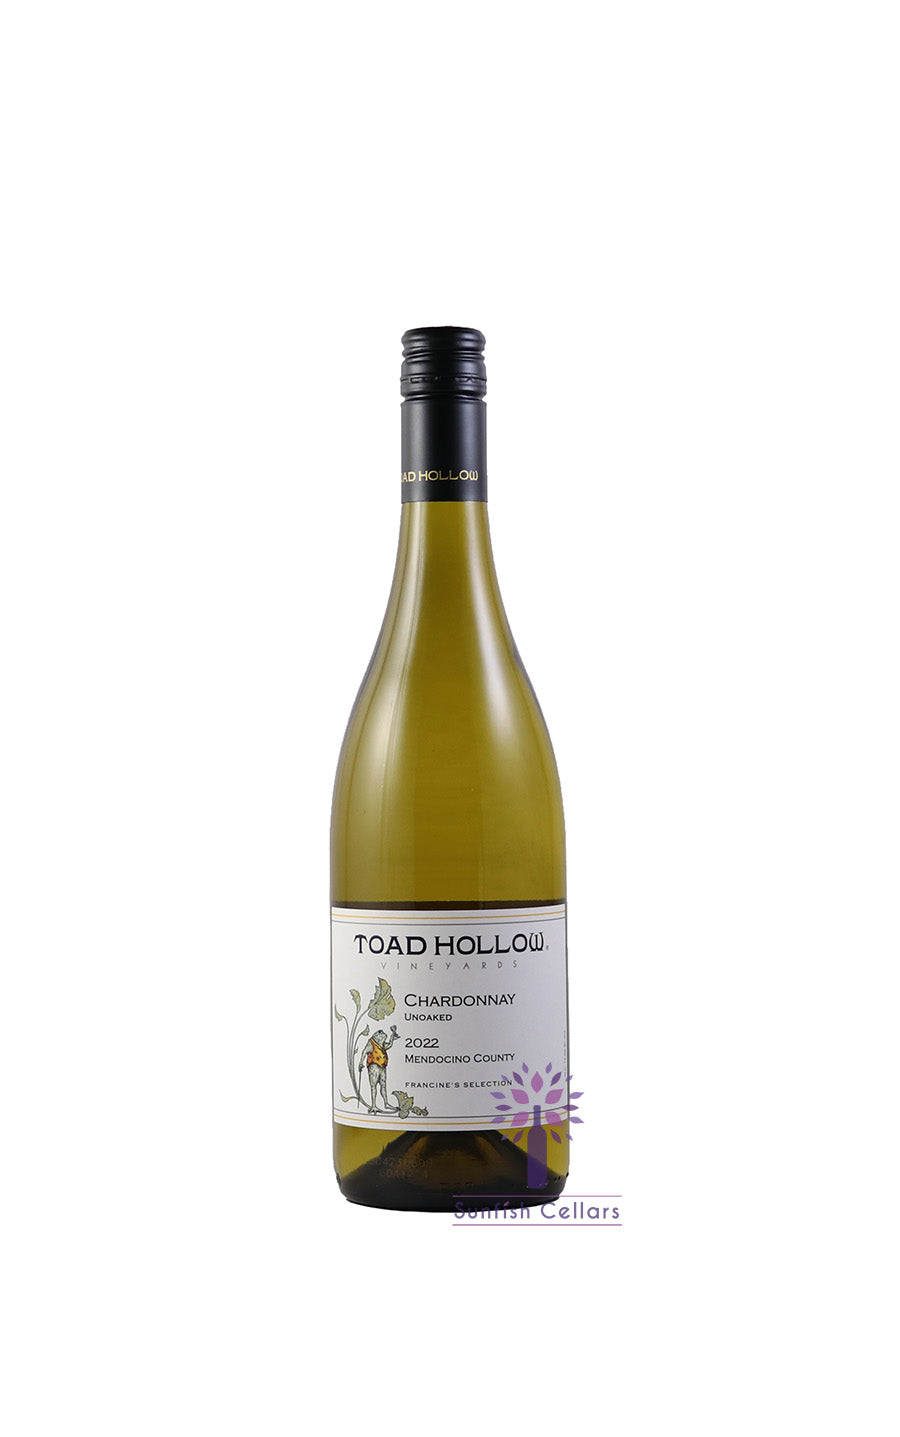 Toad Hollow Unoaked Chardonnay 2022